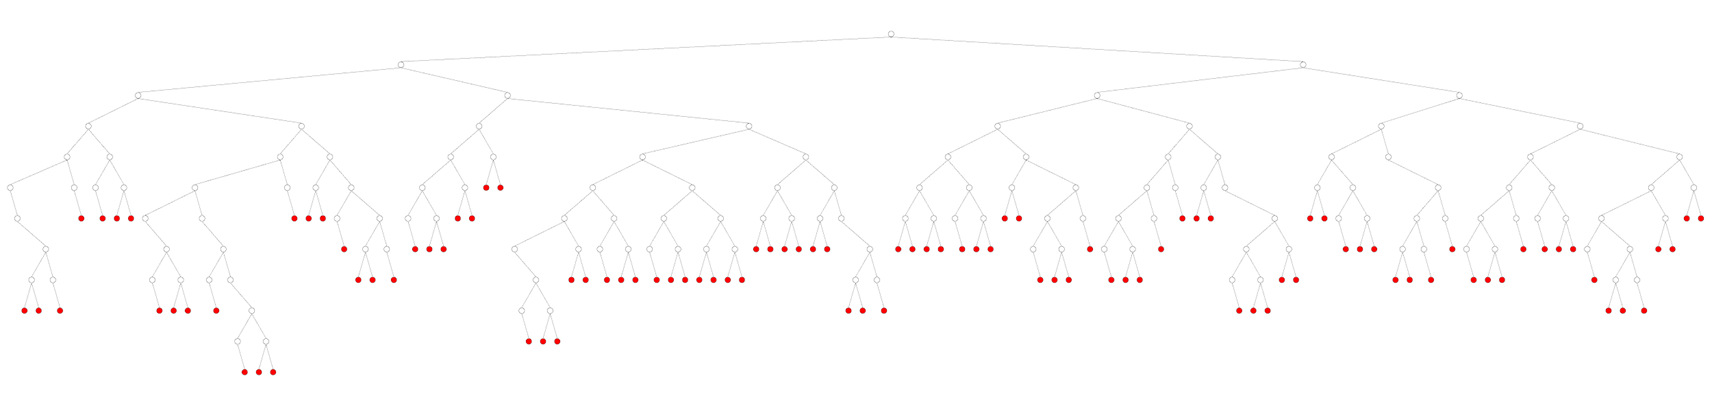 Node structure of a top-down partitioned BVH visualized by the data visualizer